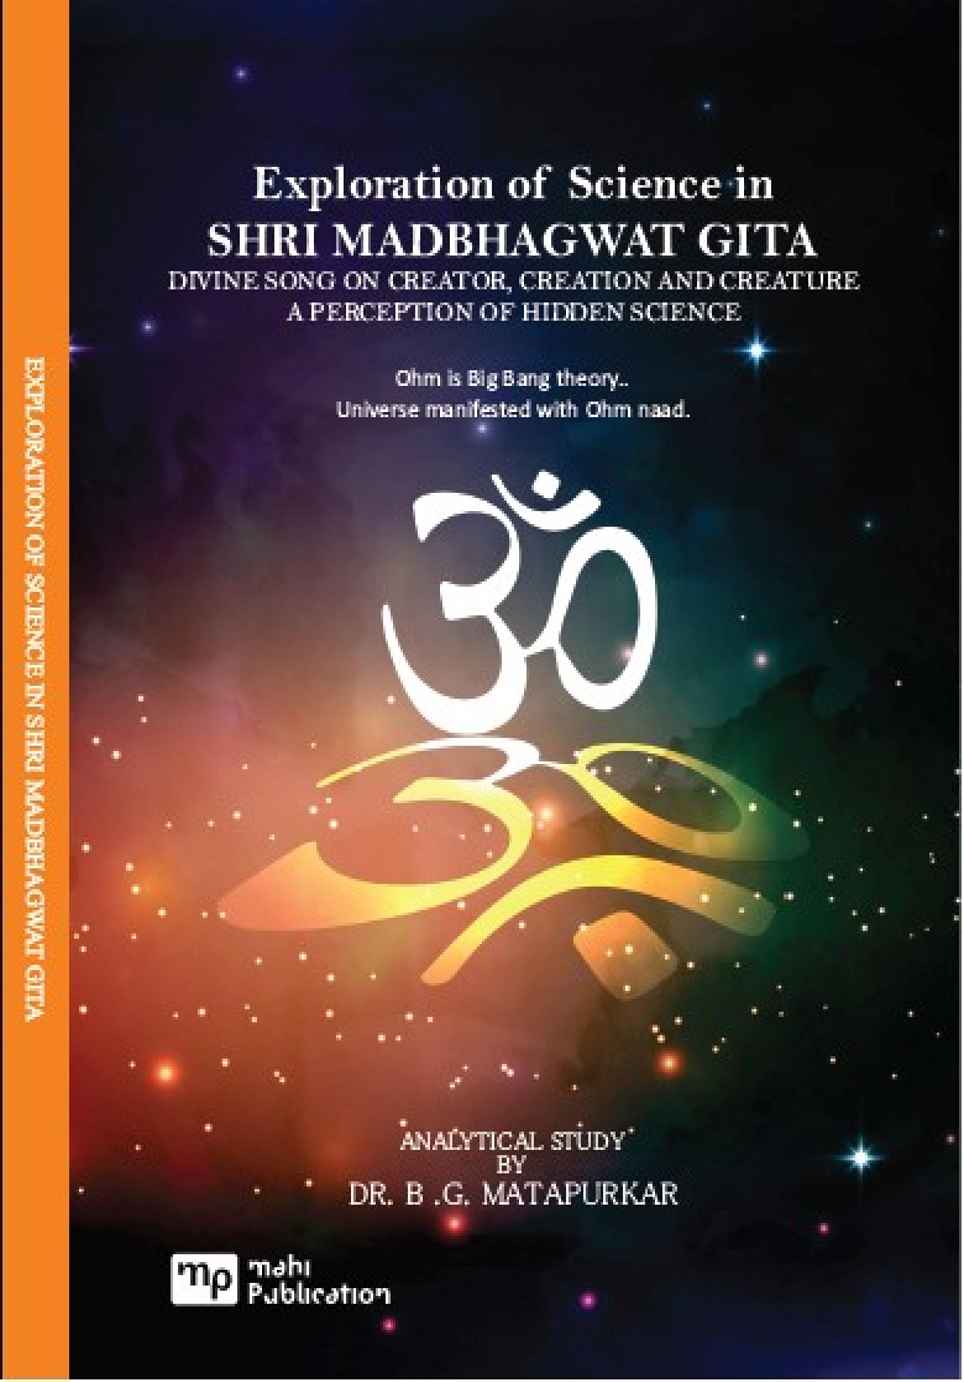 Exploration Of Science In Shrimad Bhagwat Gita Divine Song On Creator, Creation And Creature A Perception Of Hidden Science